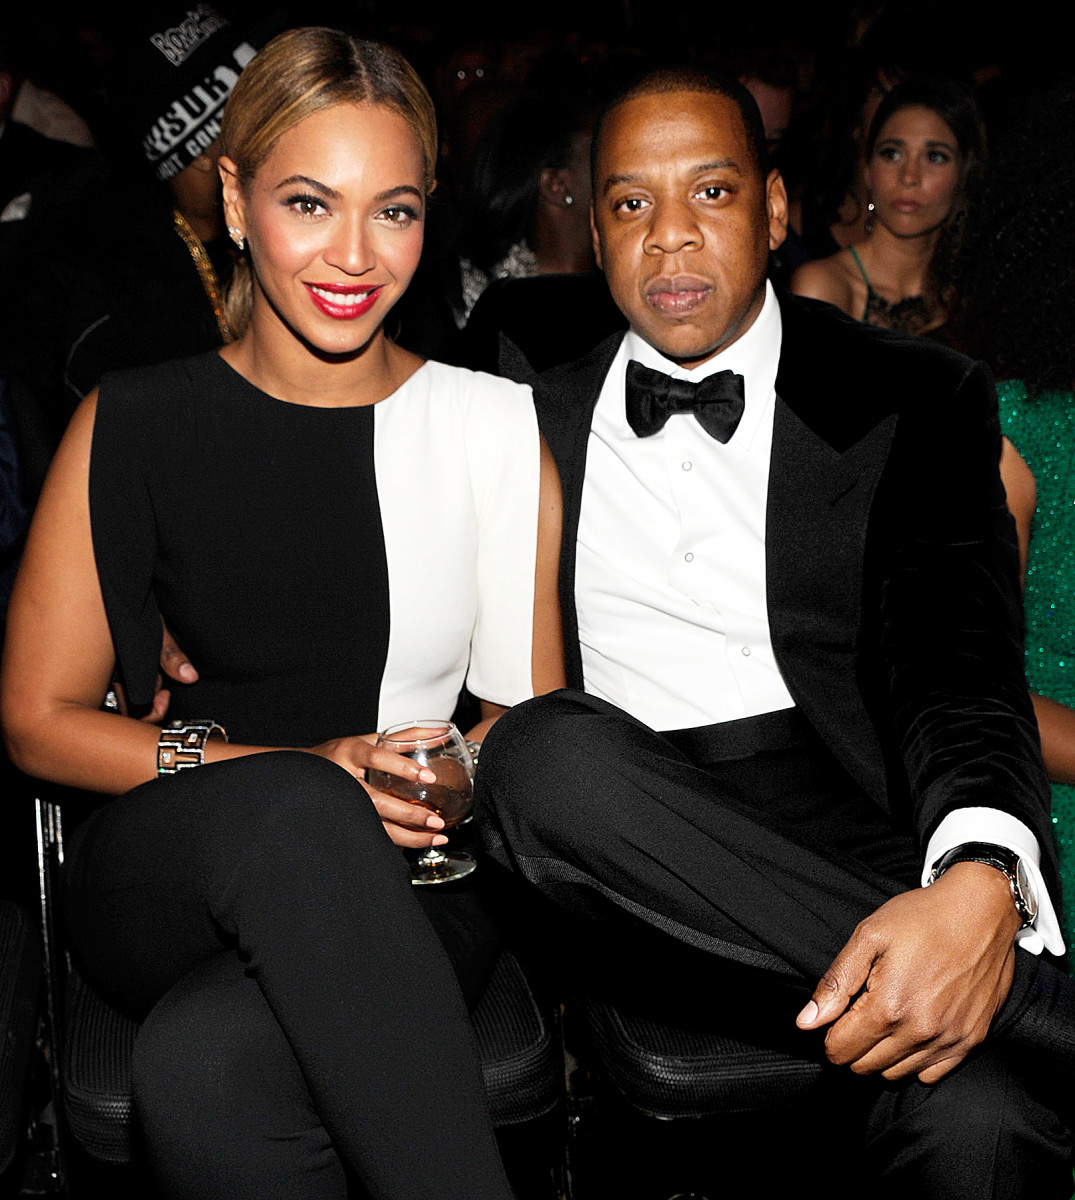 Due to the nature of their personalities, Beyoncé and Jay-Z's relationship is a pretty explosive one. We wish them a happily married life ahead and good luck in all their future endeavors together.